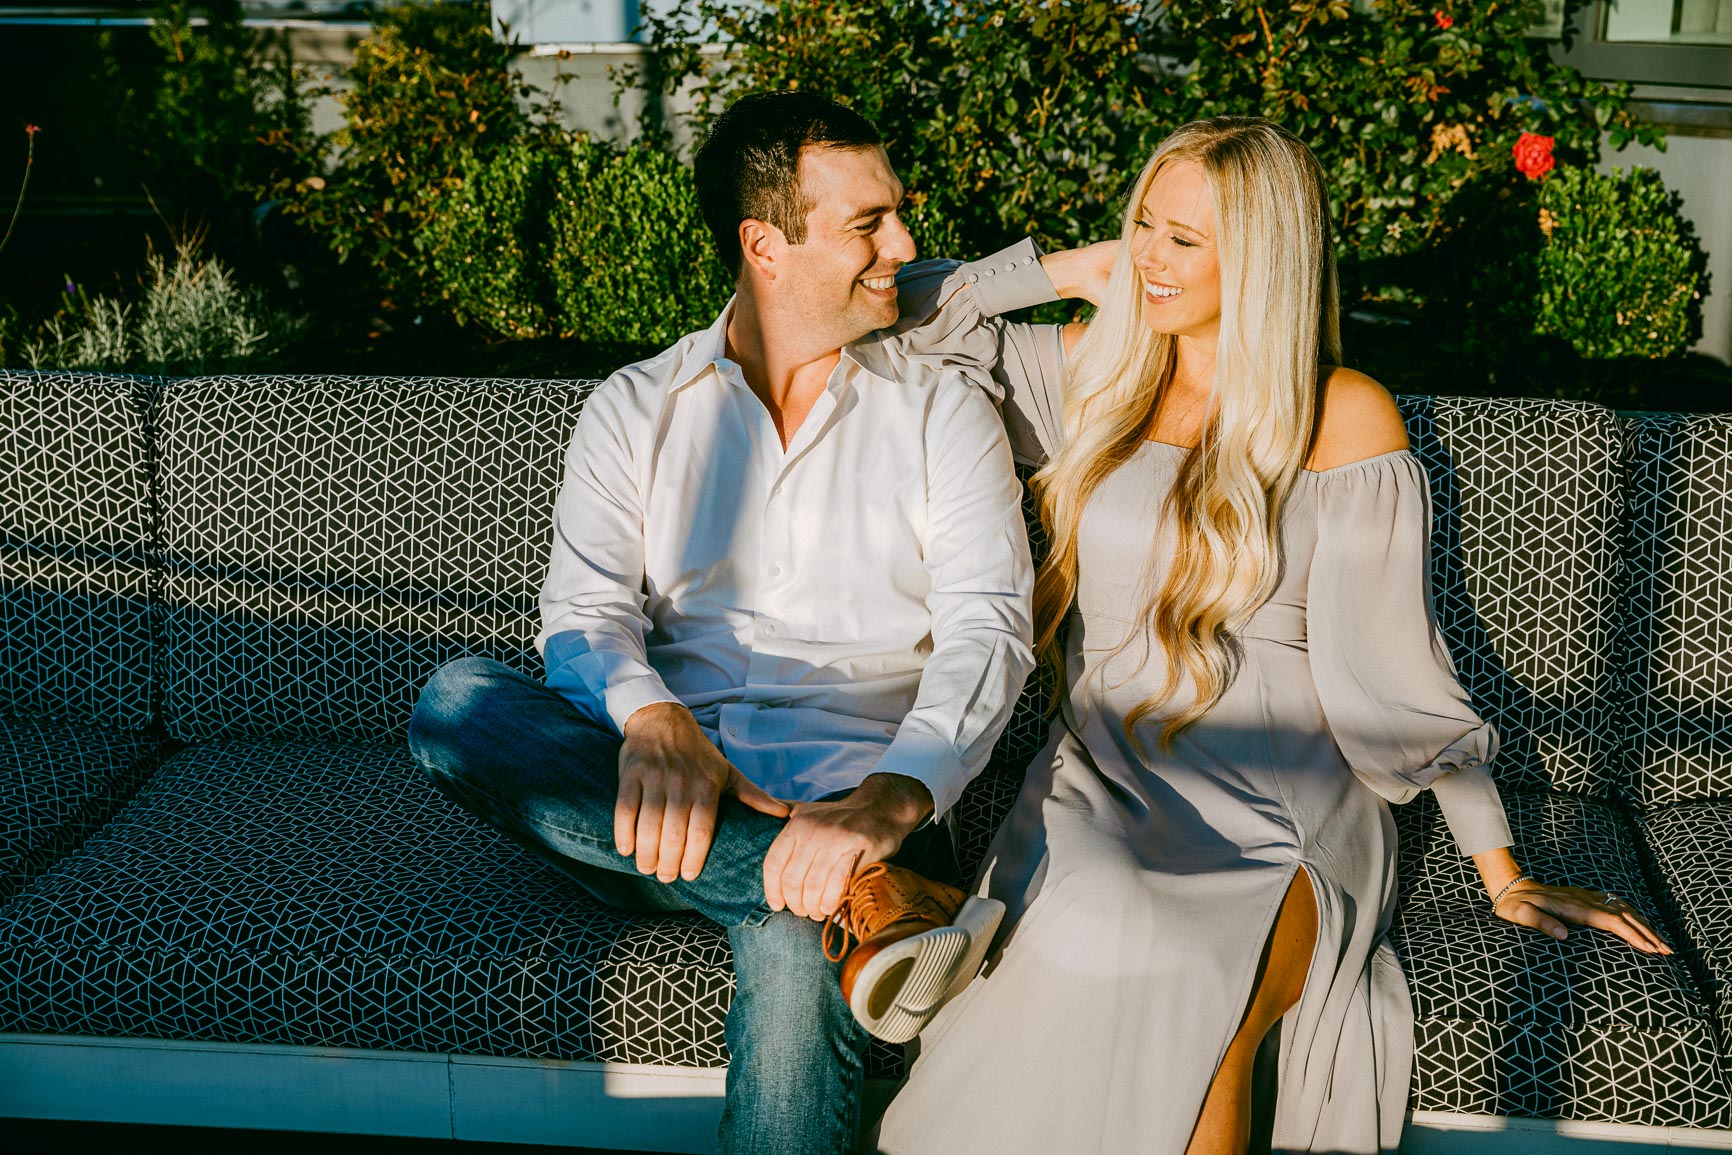 Uptown Charlotte rooftop engagement shot by Nhieu Tang Photography | nhieutang.com